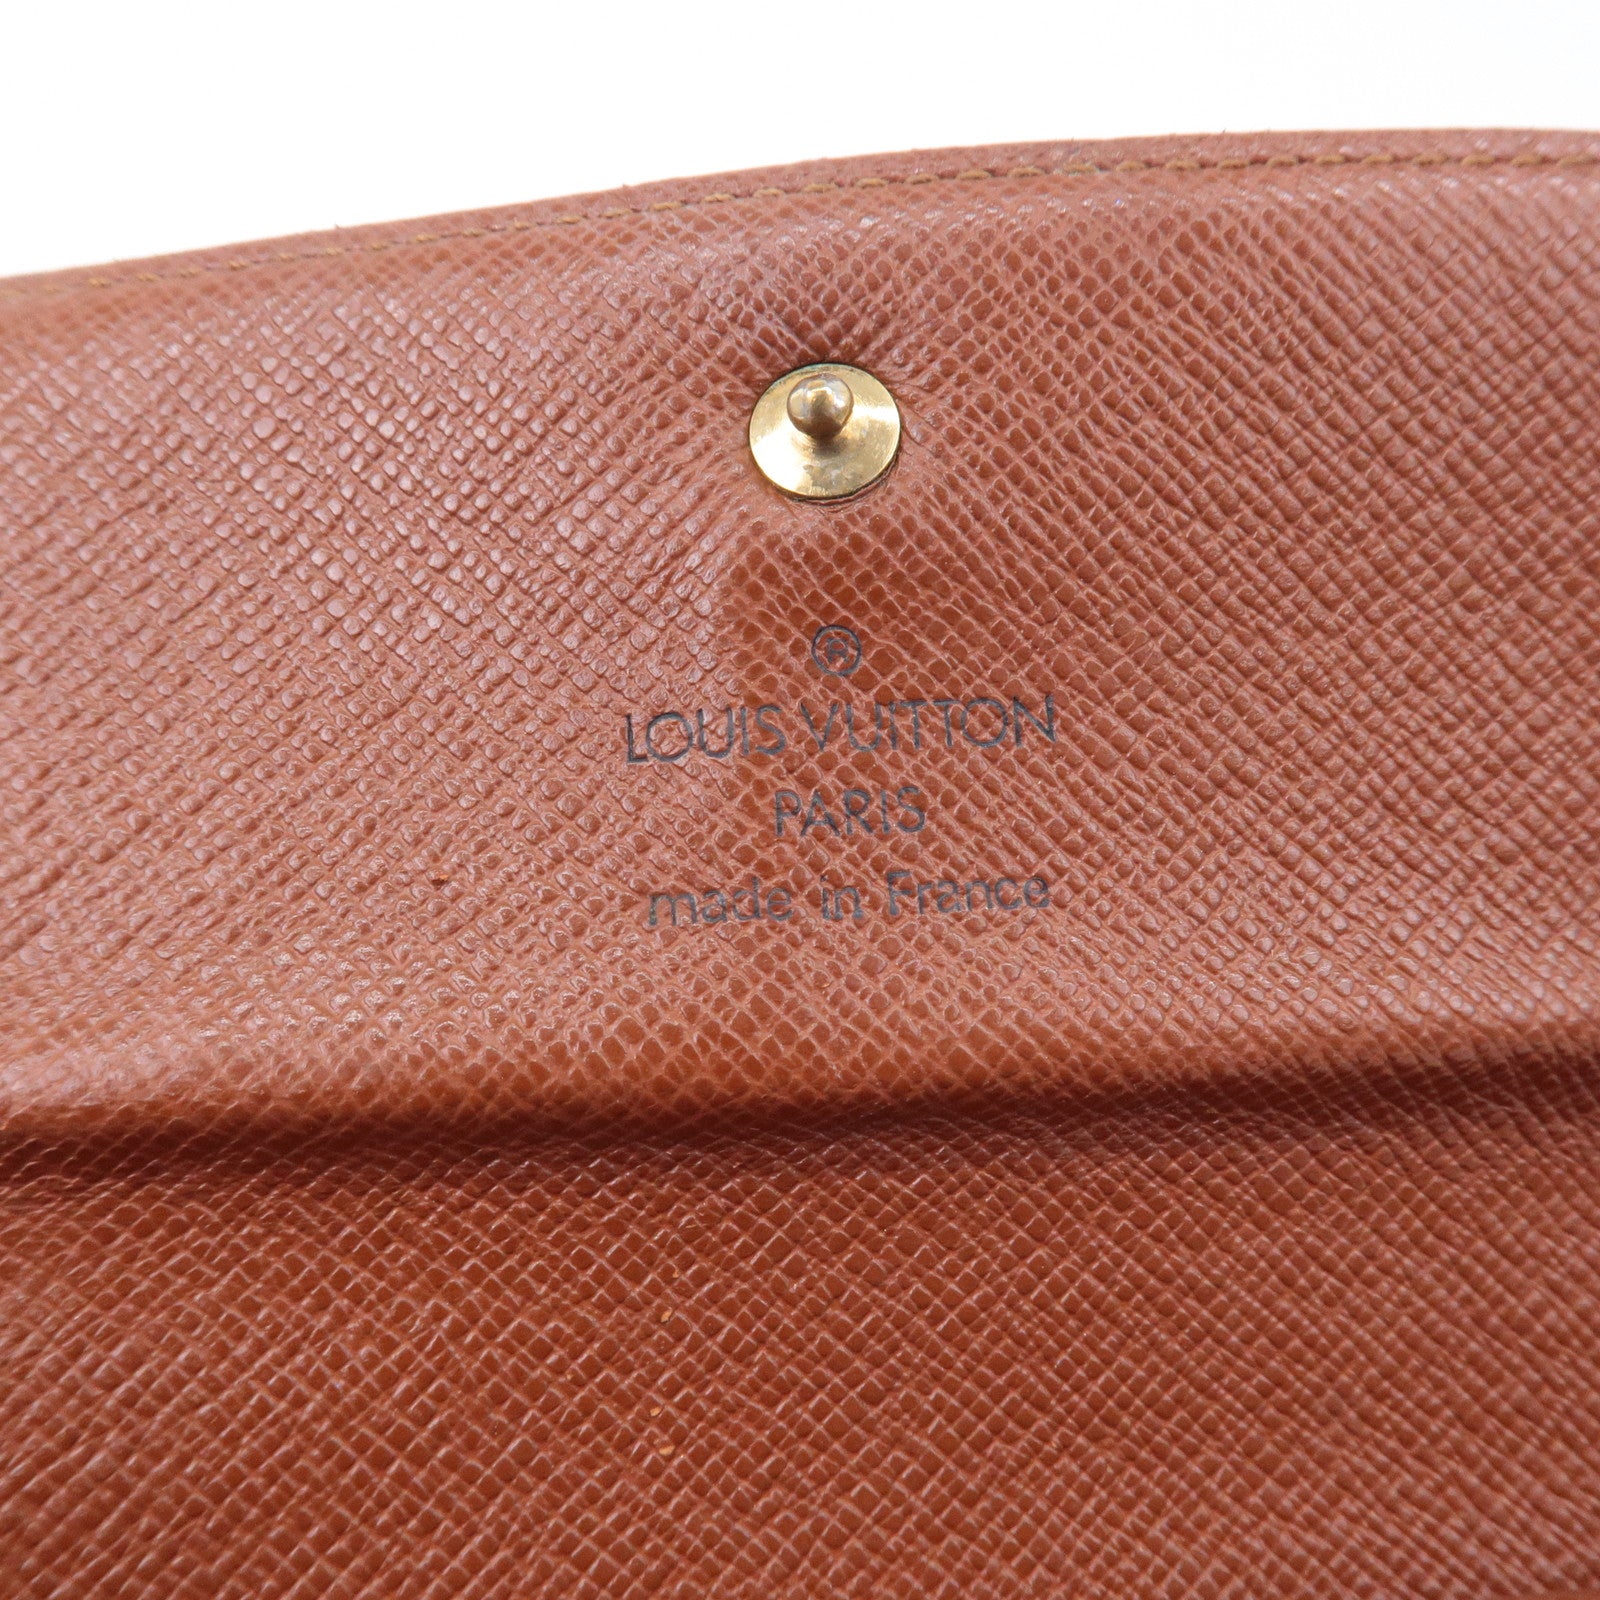 Félicie Pochette Other Monogram Canvas - Wallets and Small Leather Goods